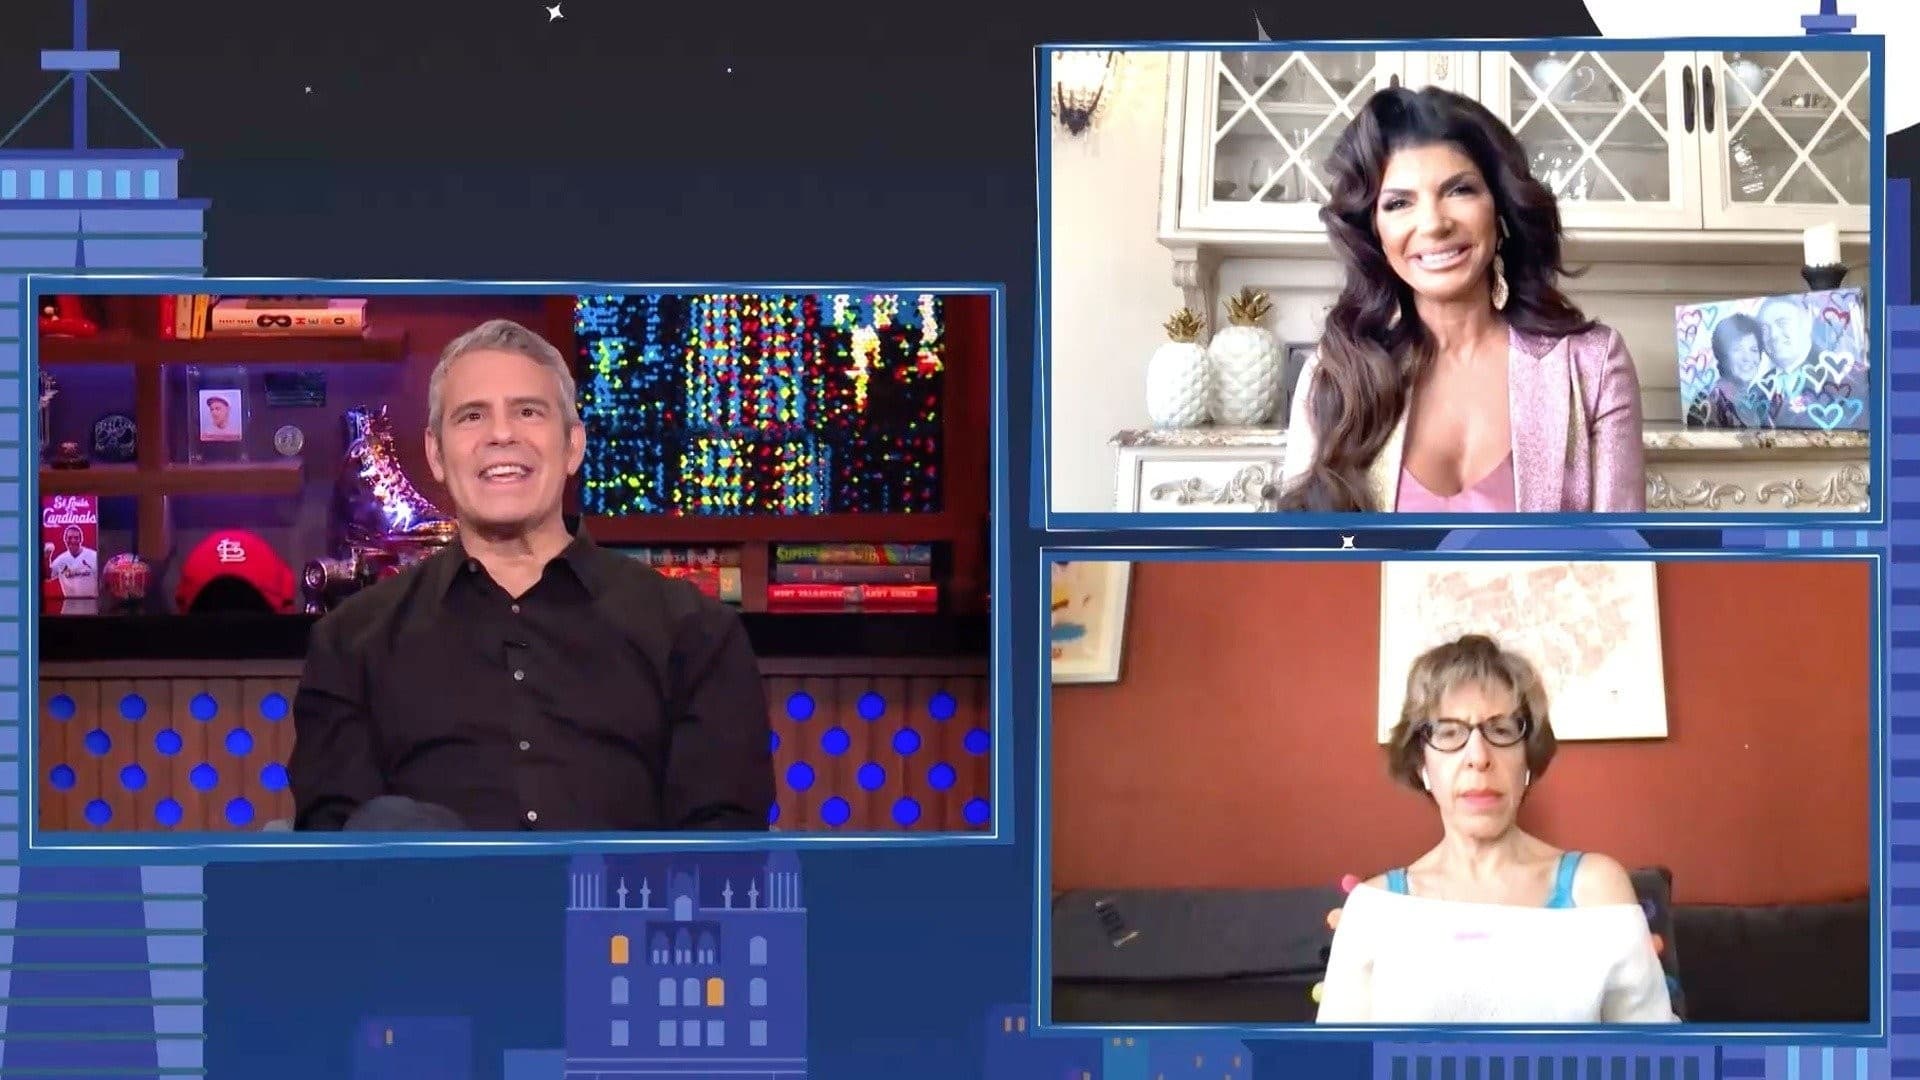 Watch What Happens Live with Andy Cohen Staffel 18 :Folge 58 